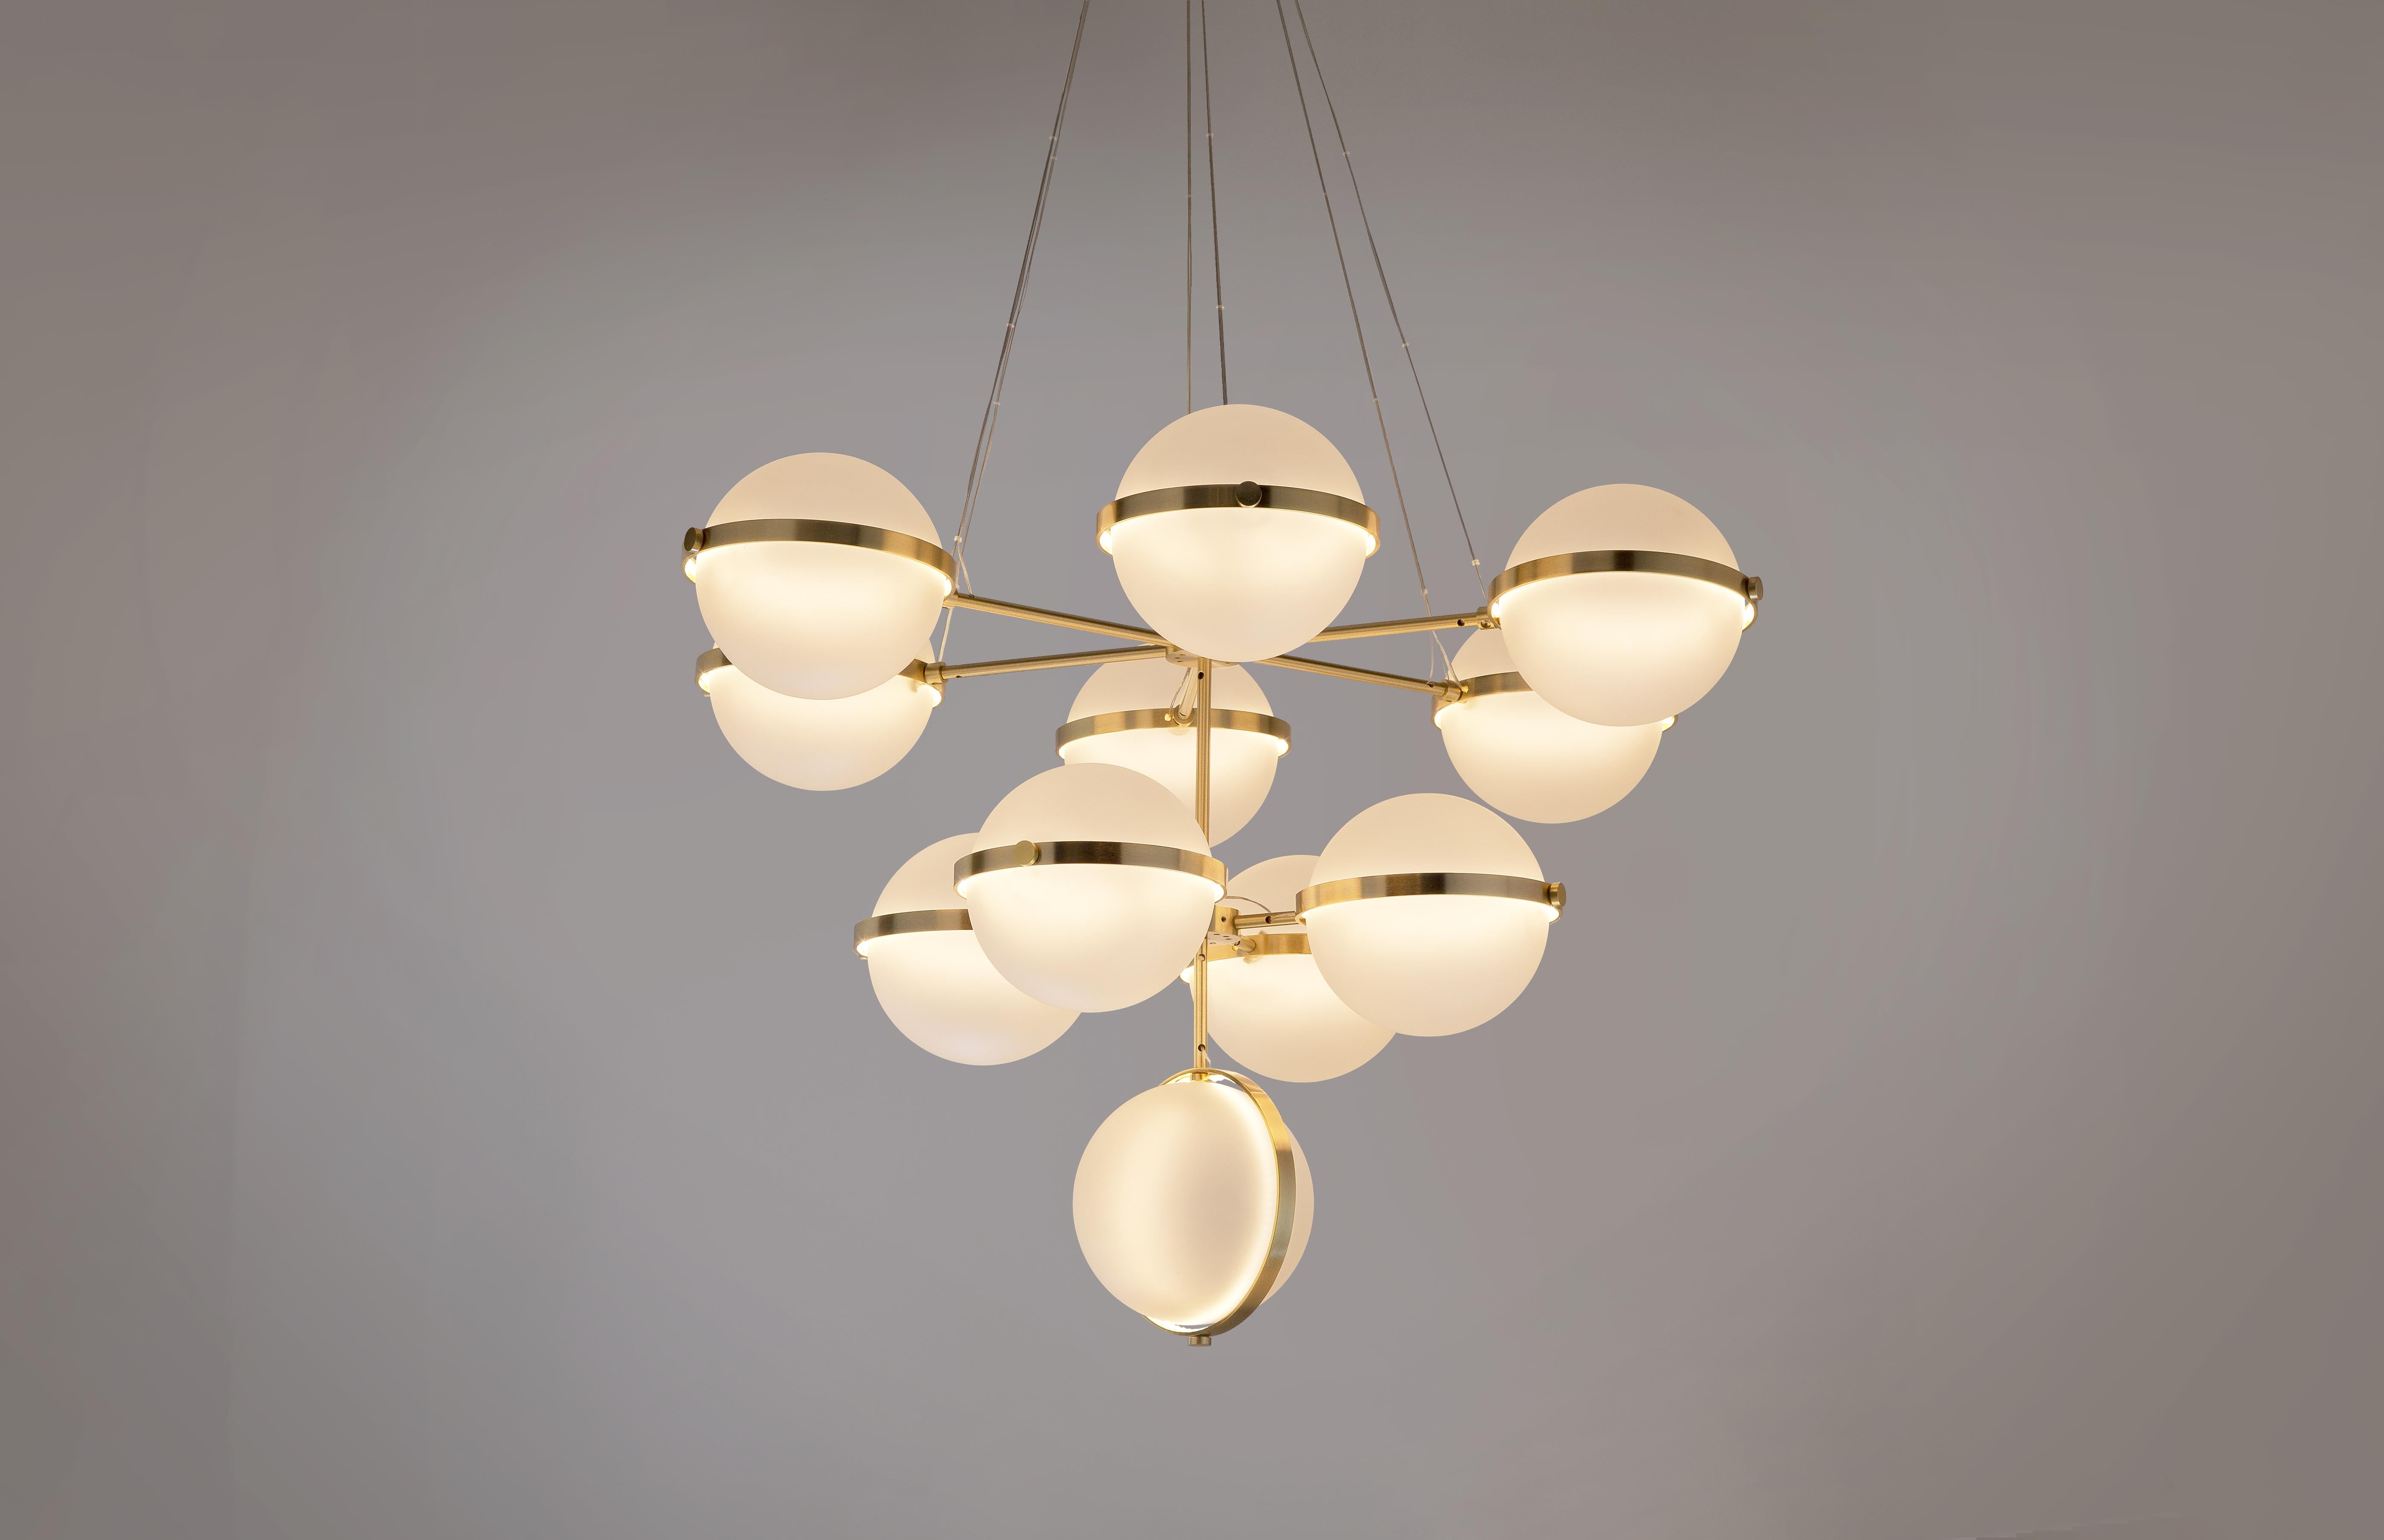 The Polaris TX 641 pendant belongs to the Flexus series by Baroncelli.

Flexus is a lighting system that comprises a palette of abstracted lines, curves and circles. Echoing the language of Modernist modular thinking, it captures the desire to